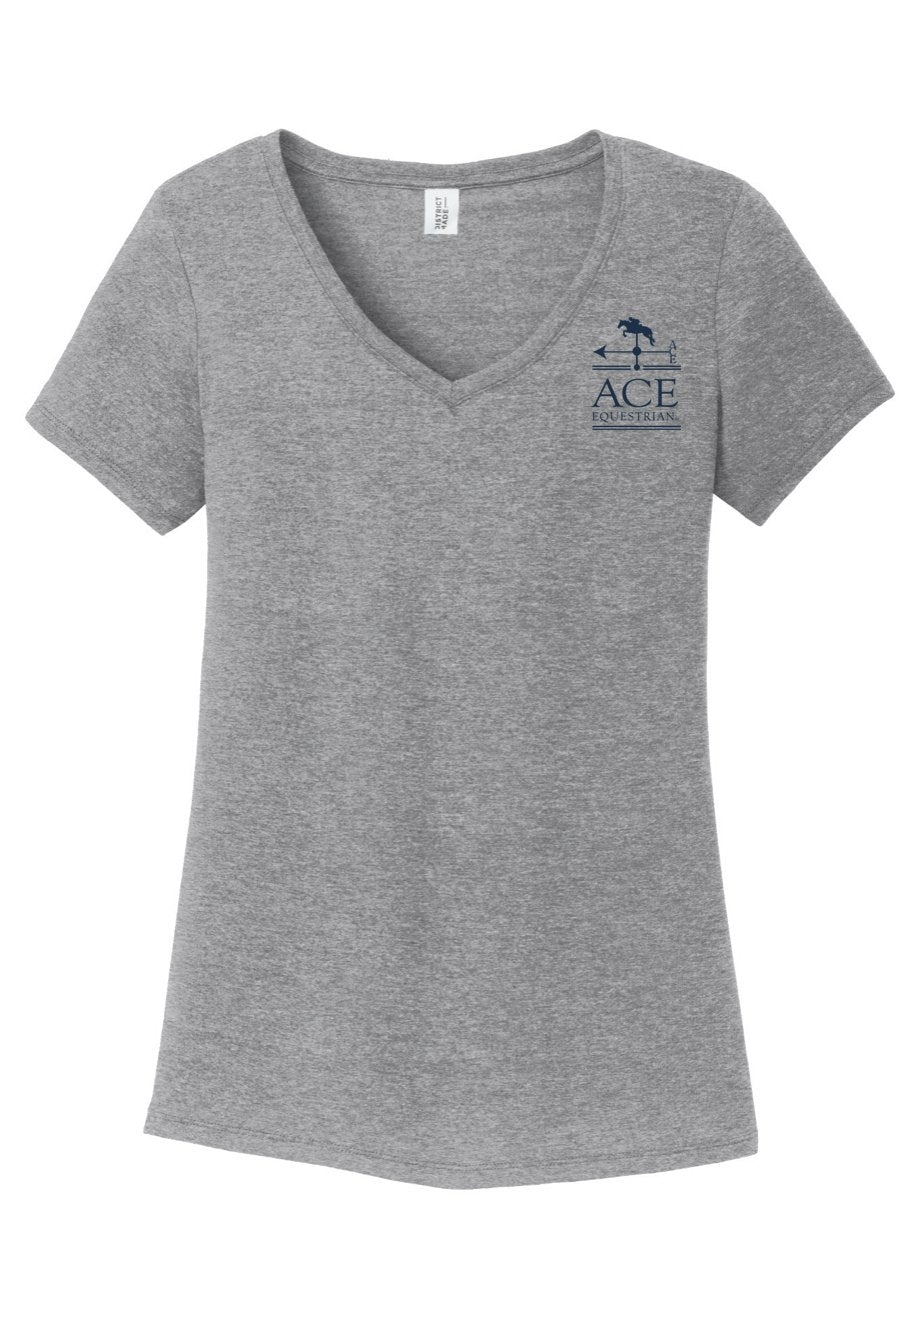 ACE Equestrian District ® Women’s Perfect Tri ® V-Neck Tee